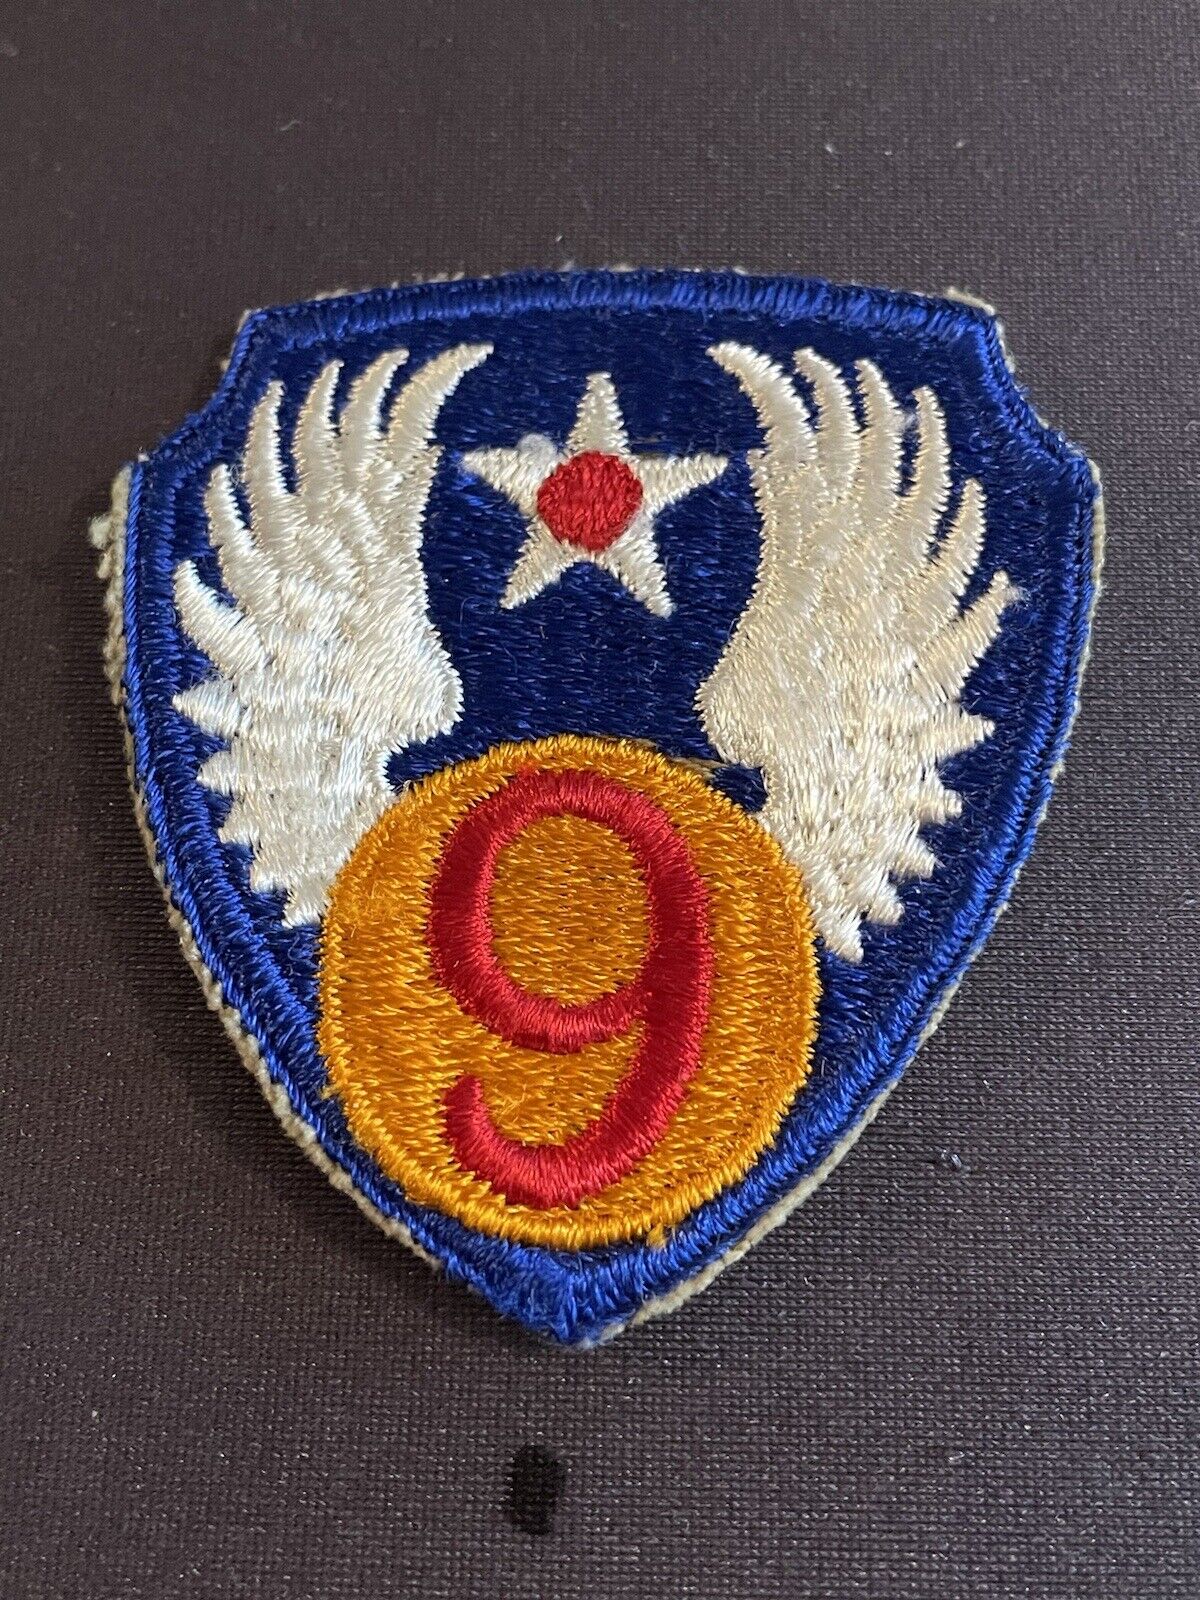 ORIGINAL WW2 9th AIR FORCE FACTORY ERROR PATCH RARE LOOK FOR OUR EXAMPLES #5